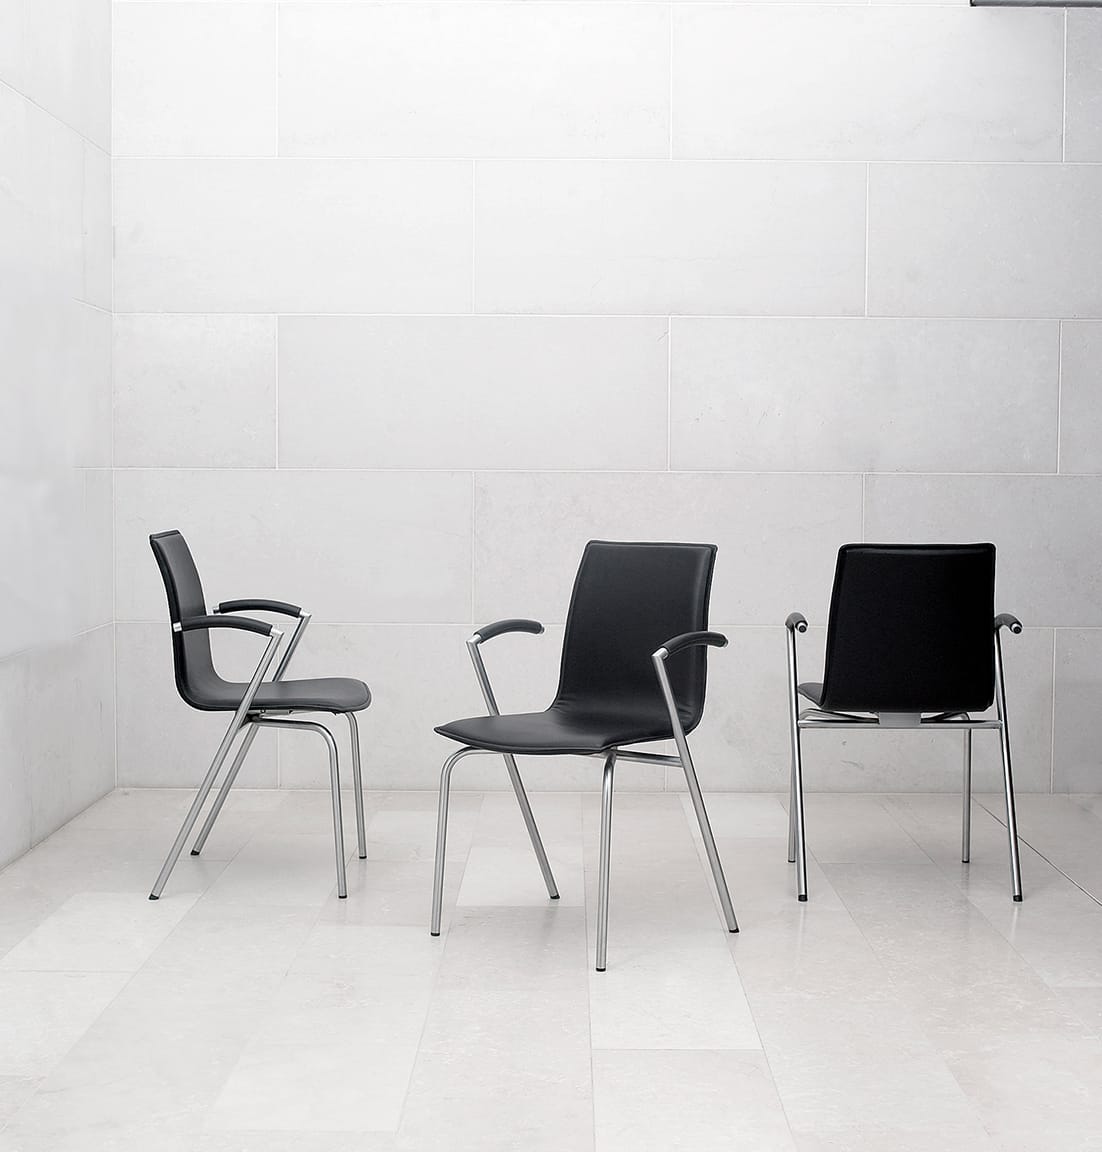 Three black office desk chairs in front of a white wall.